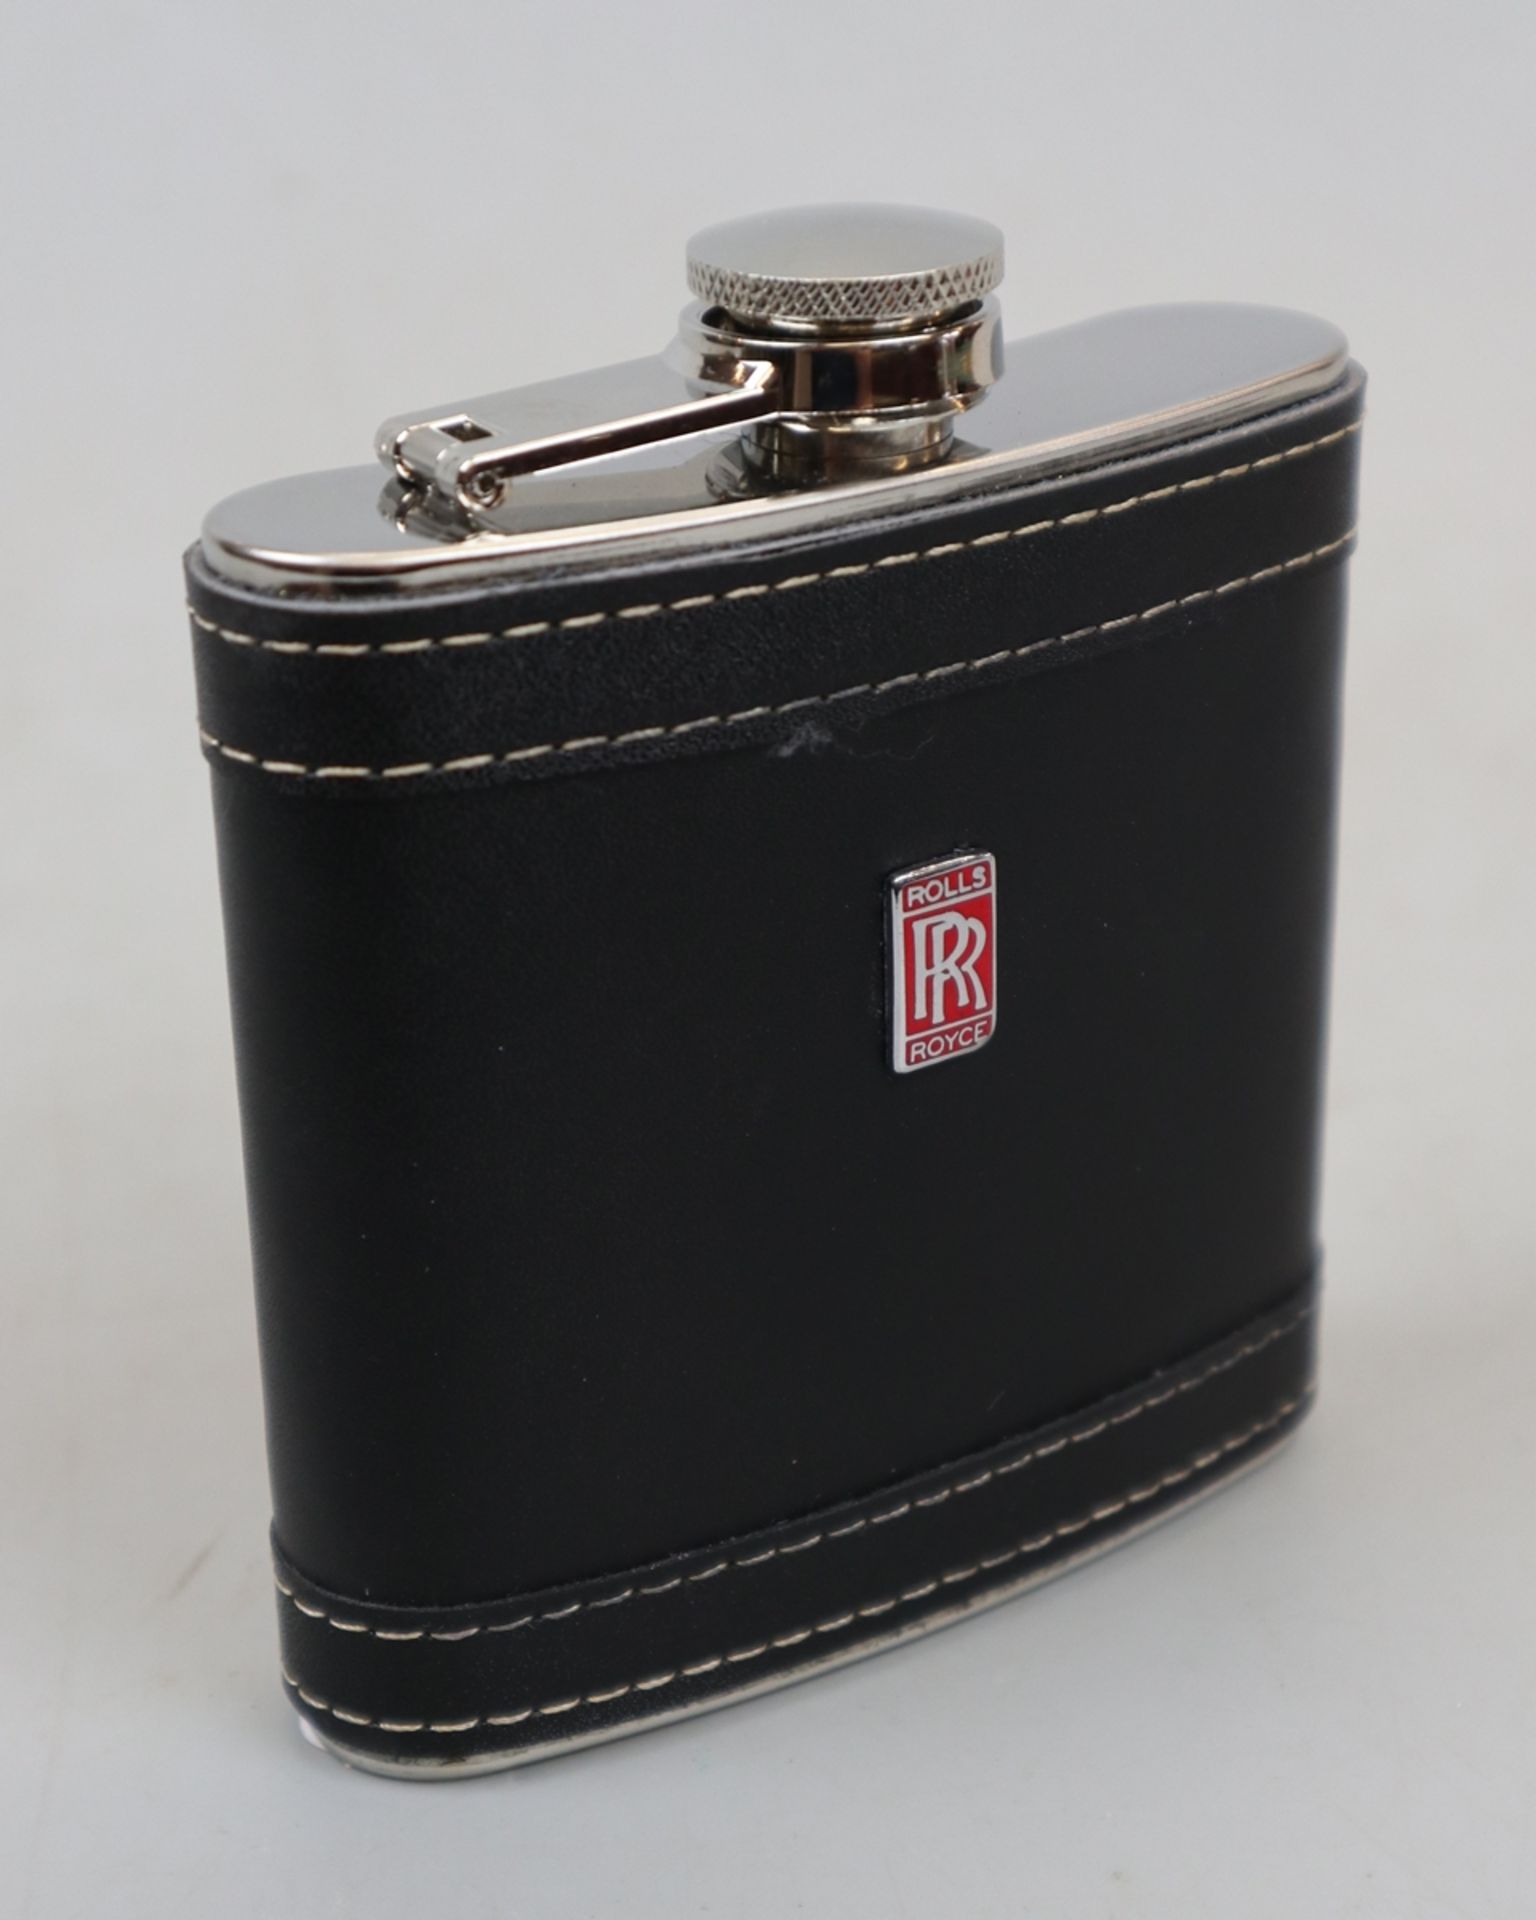 Rolls Royce 1979 L/E leather covered hip flask - Part of the RR range to celebrate 75 years